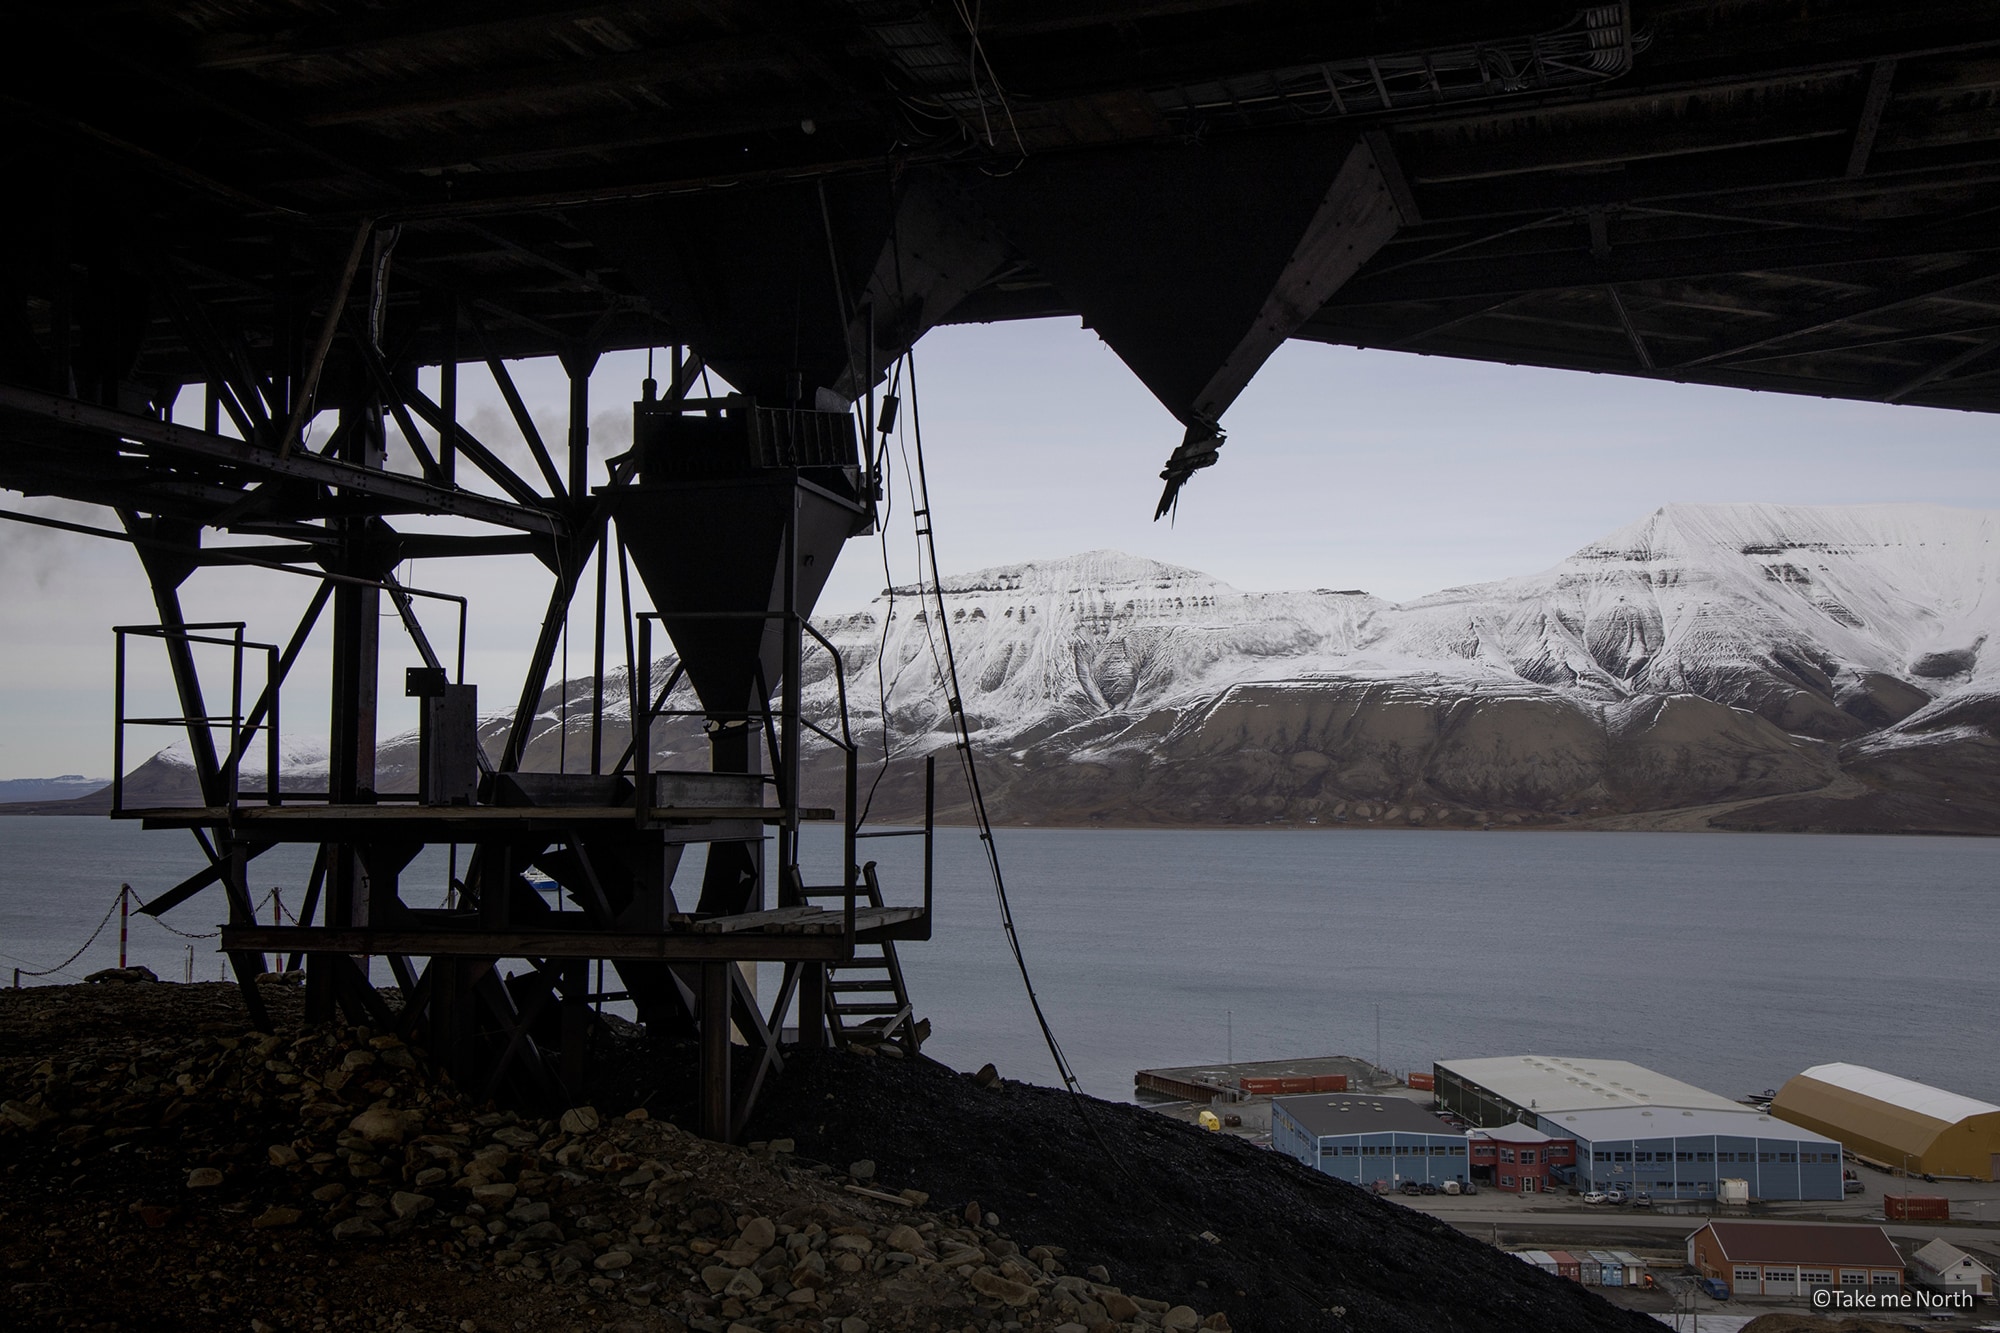 A historic mining rig at a hilltop in Longyearbyen.